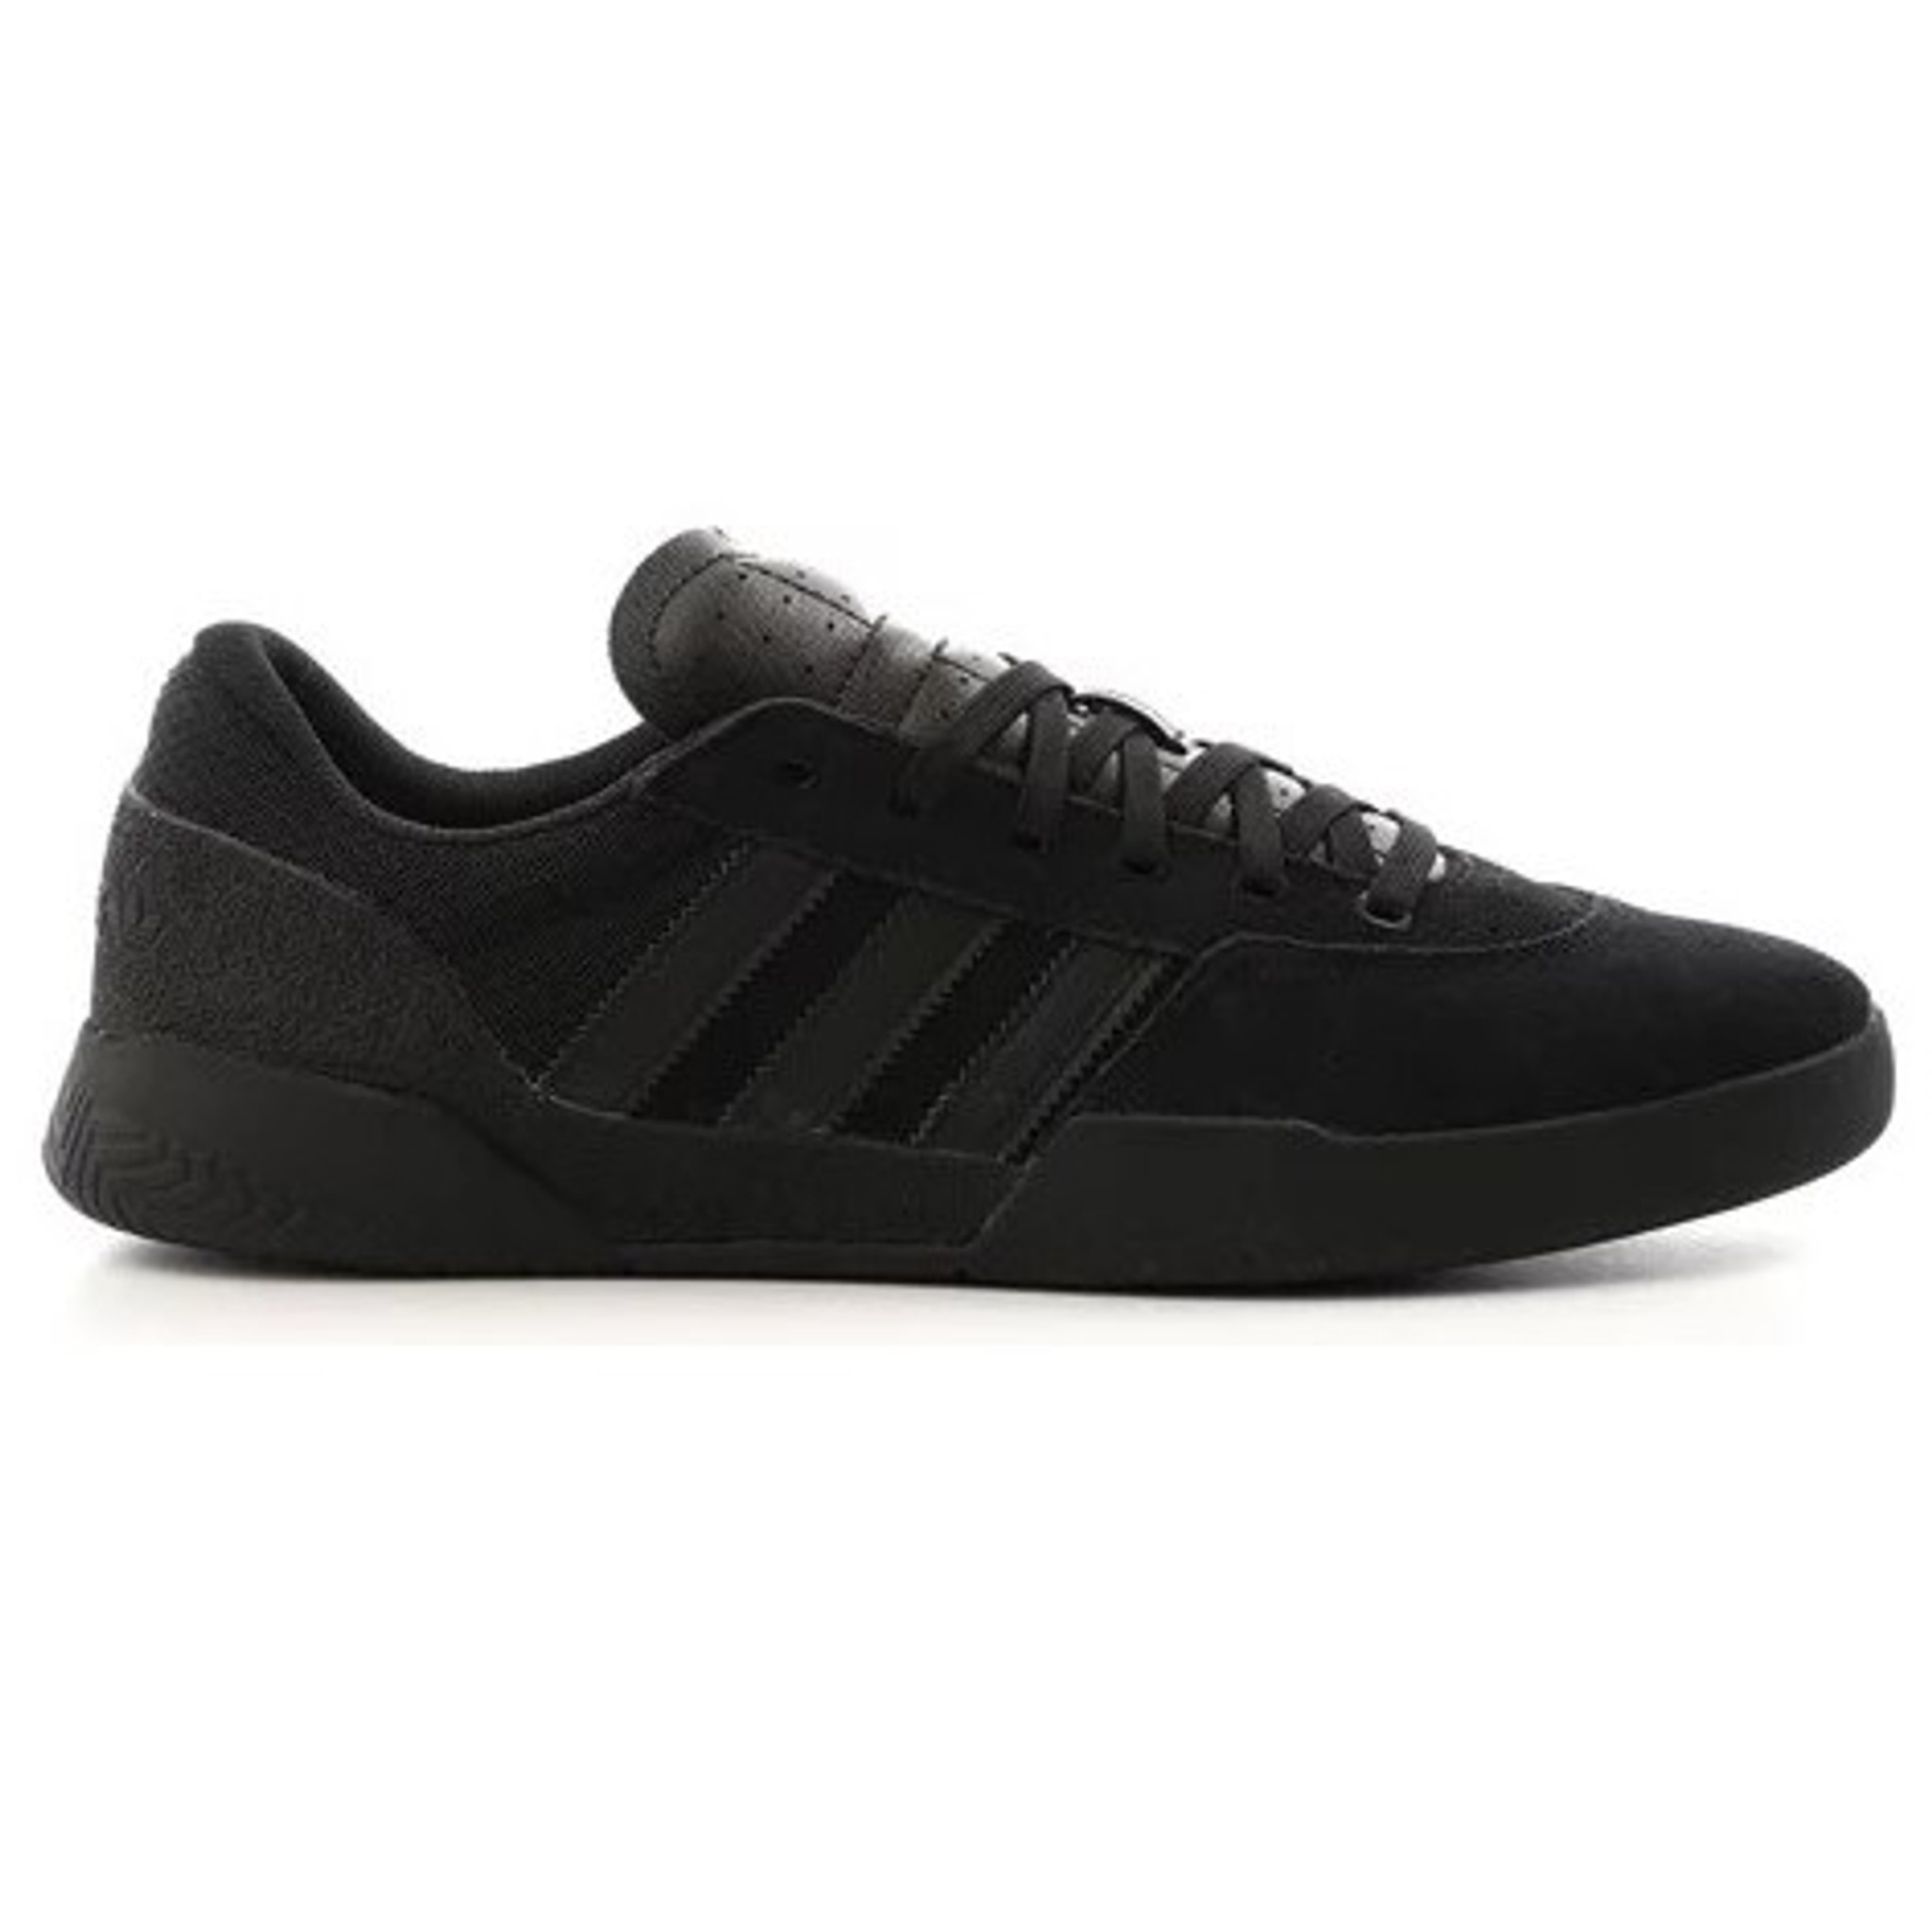 adidas city cup shoes